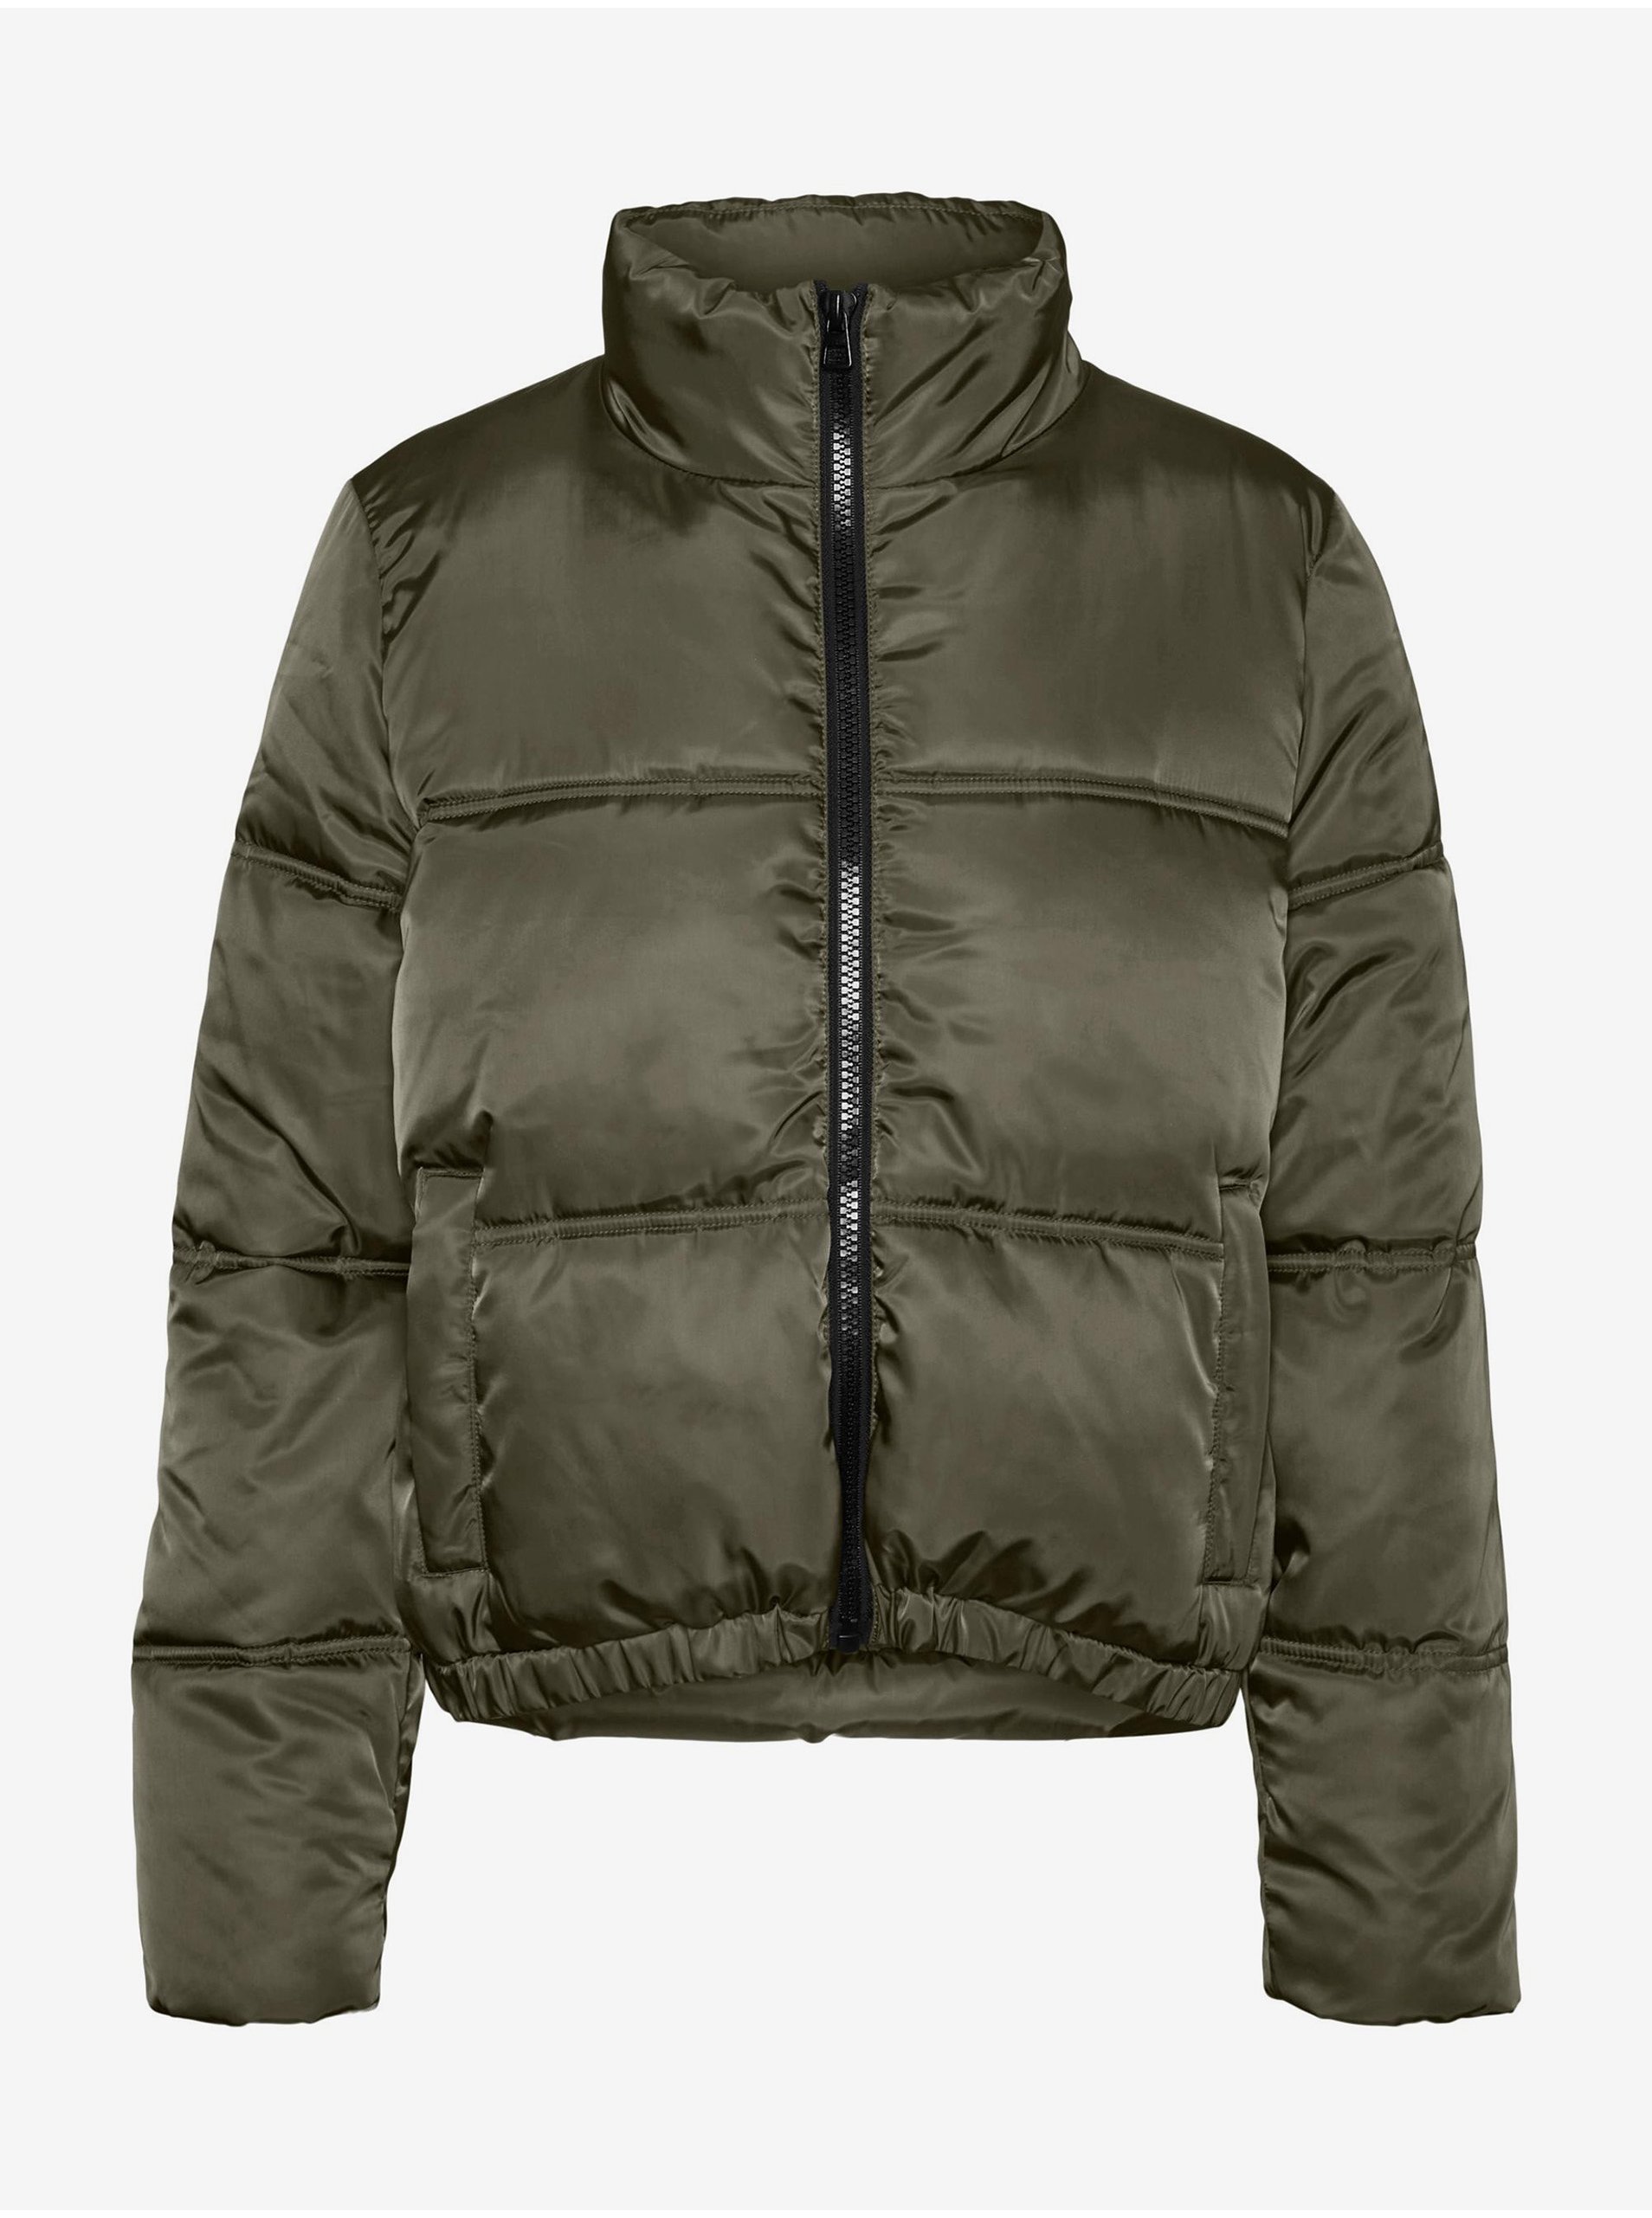 Khaki Quilted Winter Jacket Noisy May Anni - Women